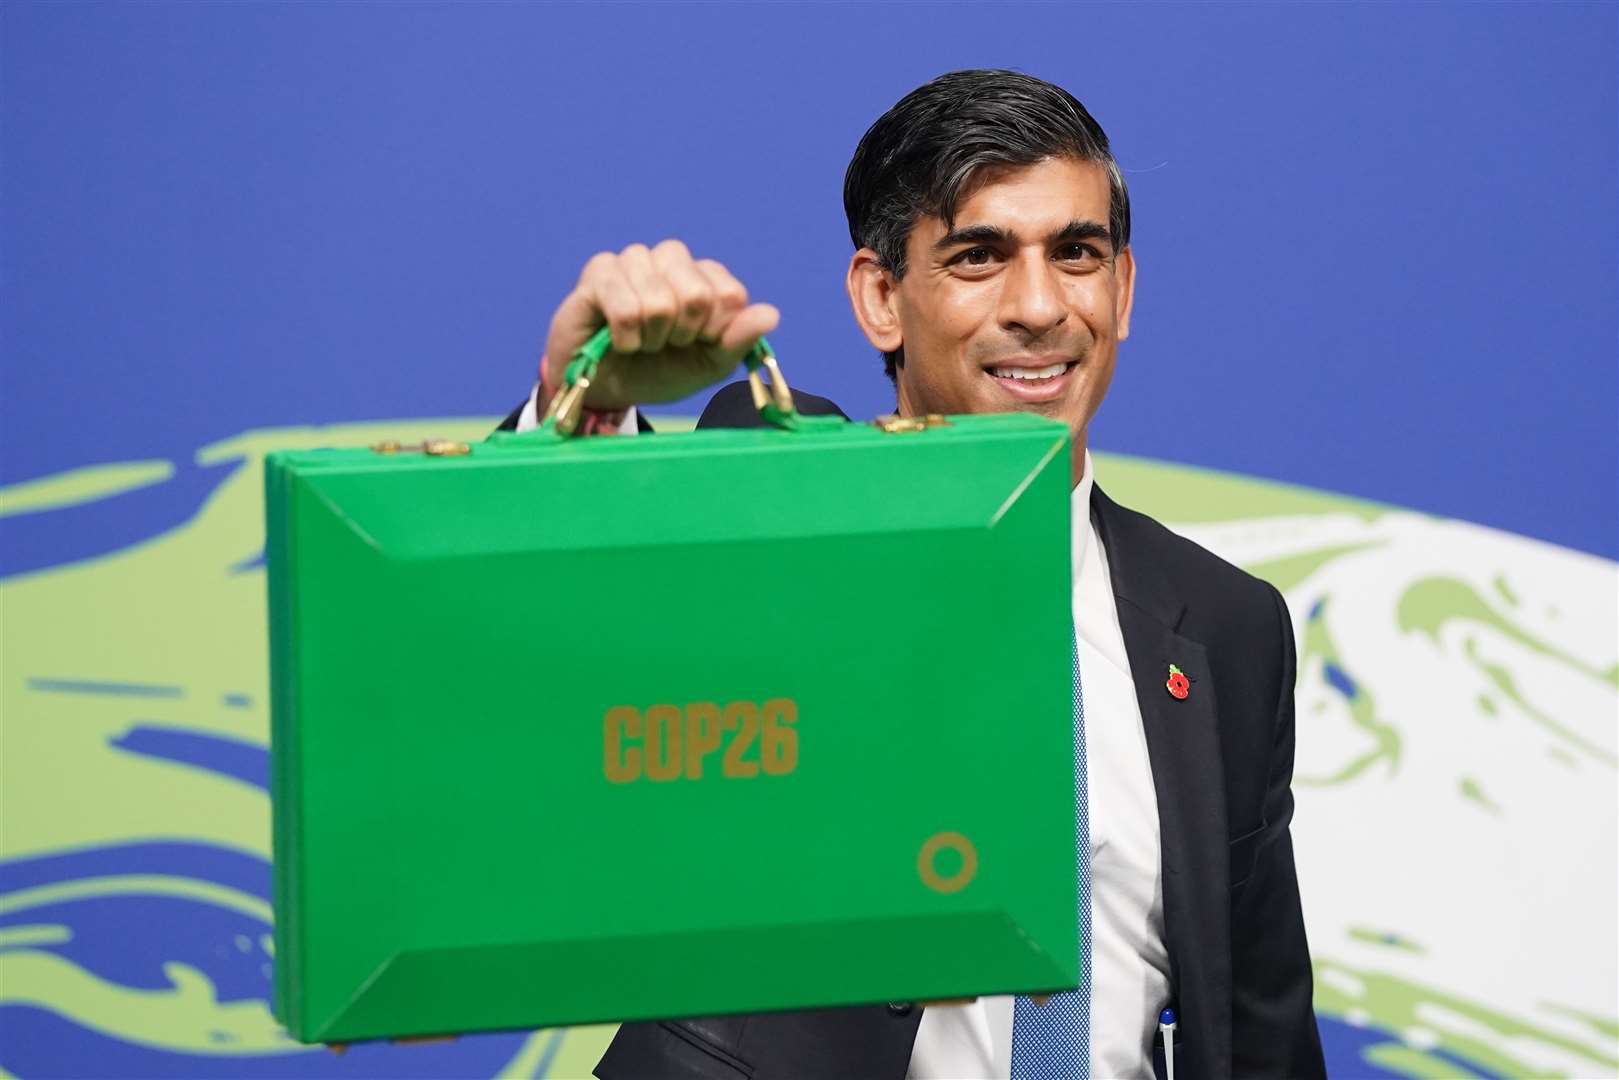 Rishi Sunak backed green finance plans as chancellor at Cop26 in Glasgow, but his commitment to climate action has been questioned since he became Prime Minister (Stefan Rousseau/PA)